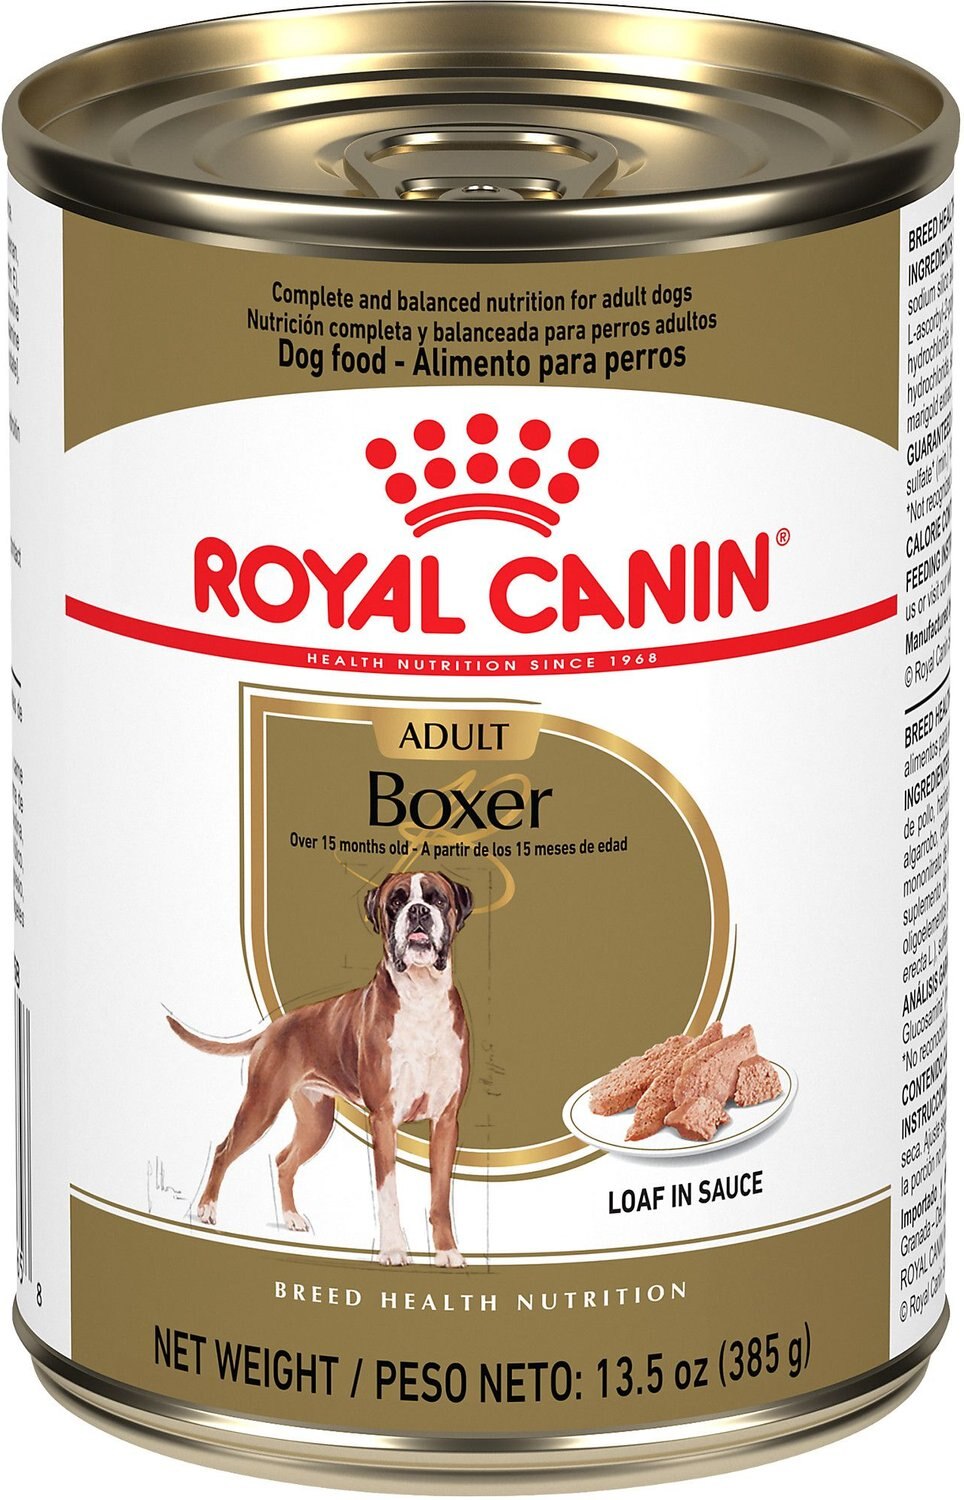 Royal Canin Breed Health Nutrition Boxer Adult Loaf in Sauce